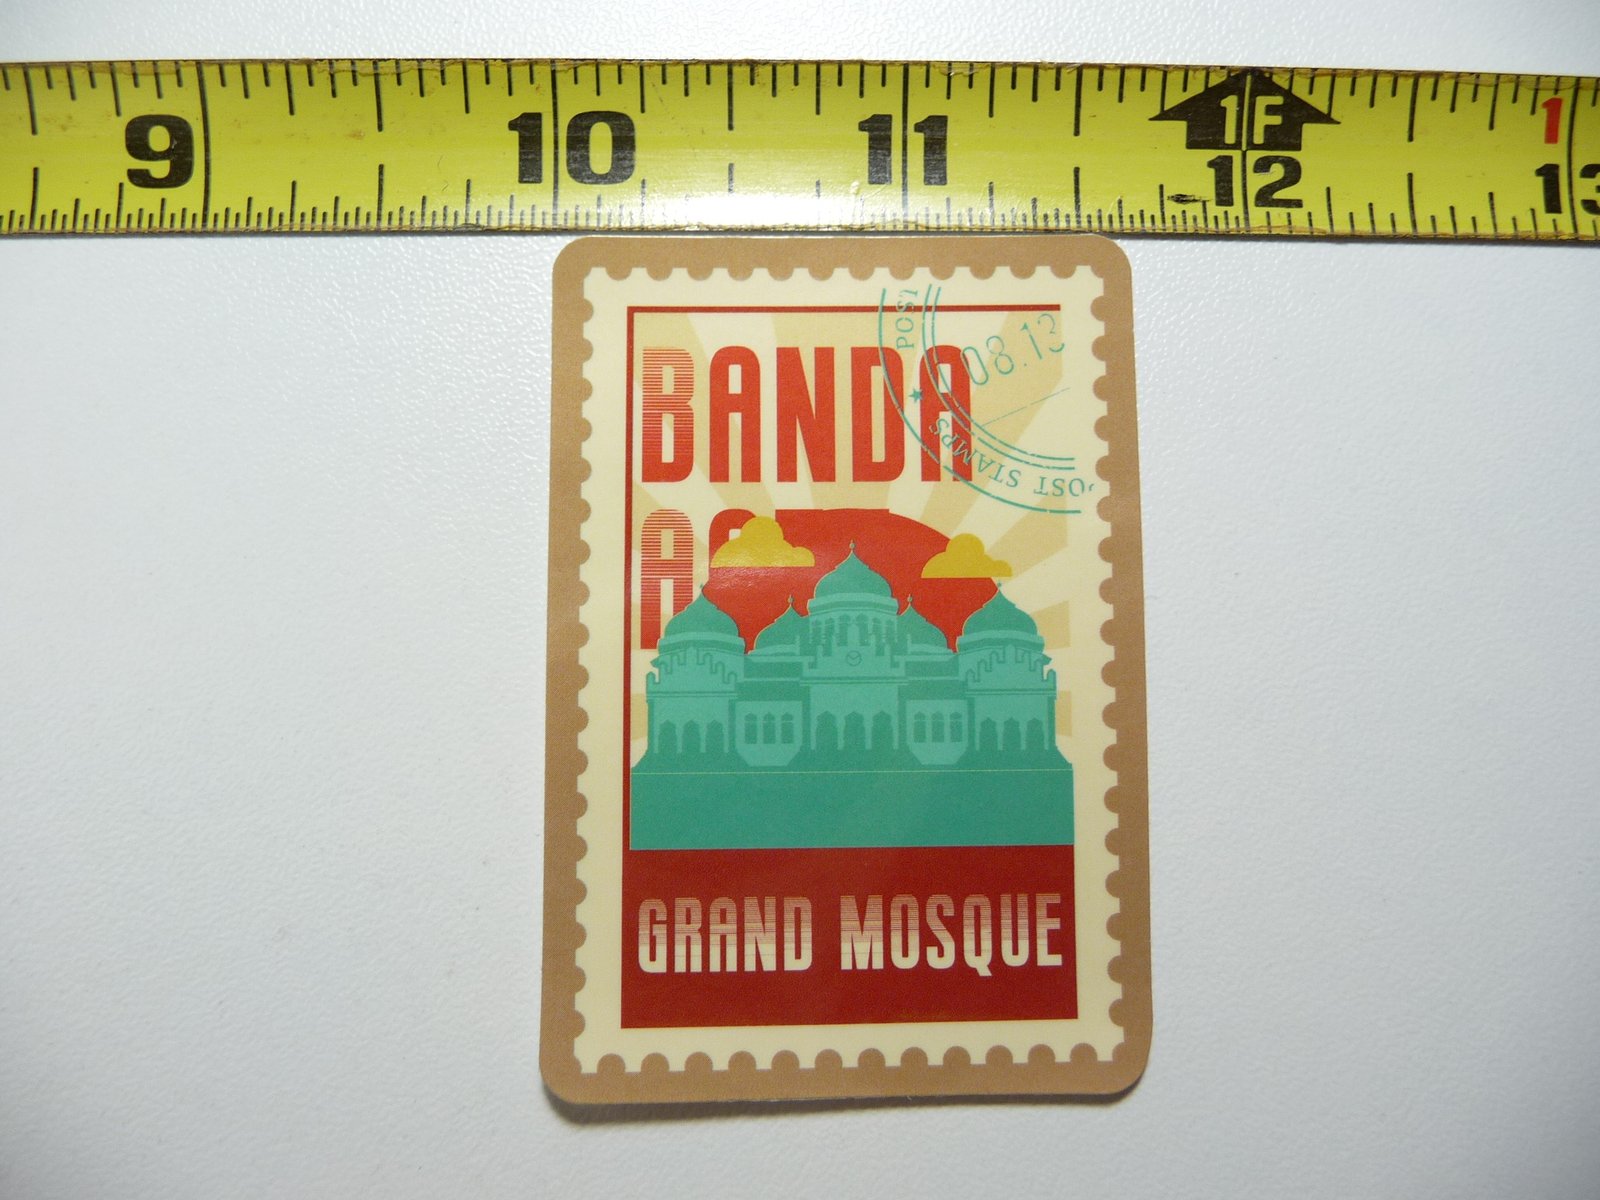 GRAND MOSQUE BANDA ACEH INDONESIA STICKER DECAL WORLD TRAVEL SITES FAMOUS - Foto 1 di 1